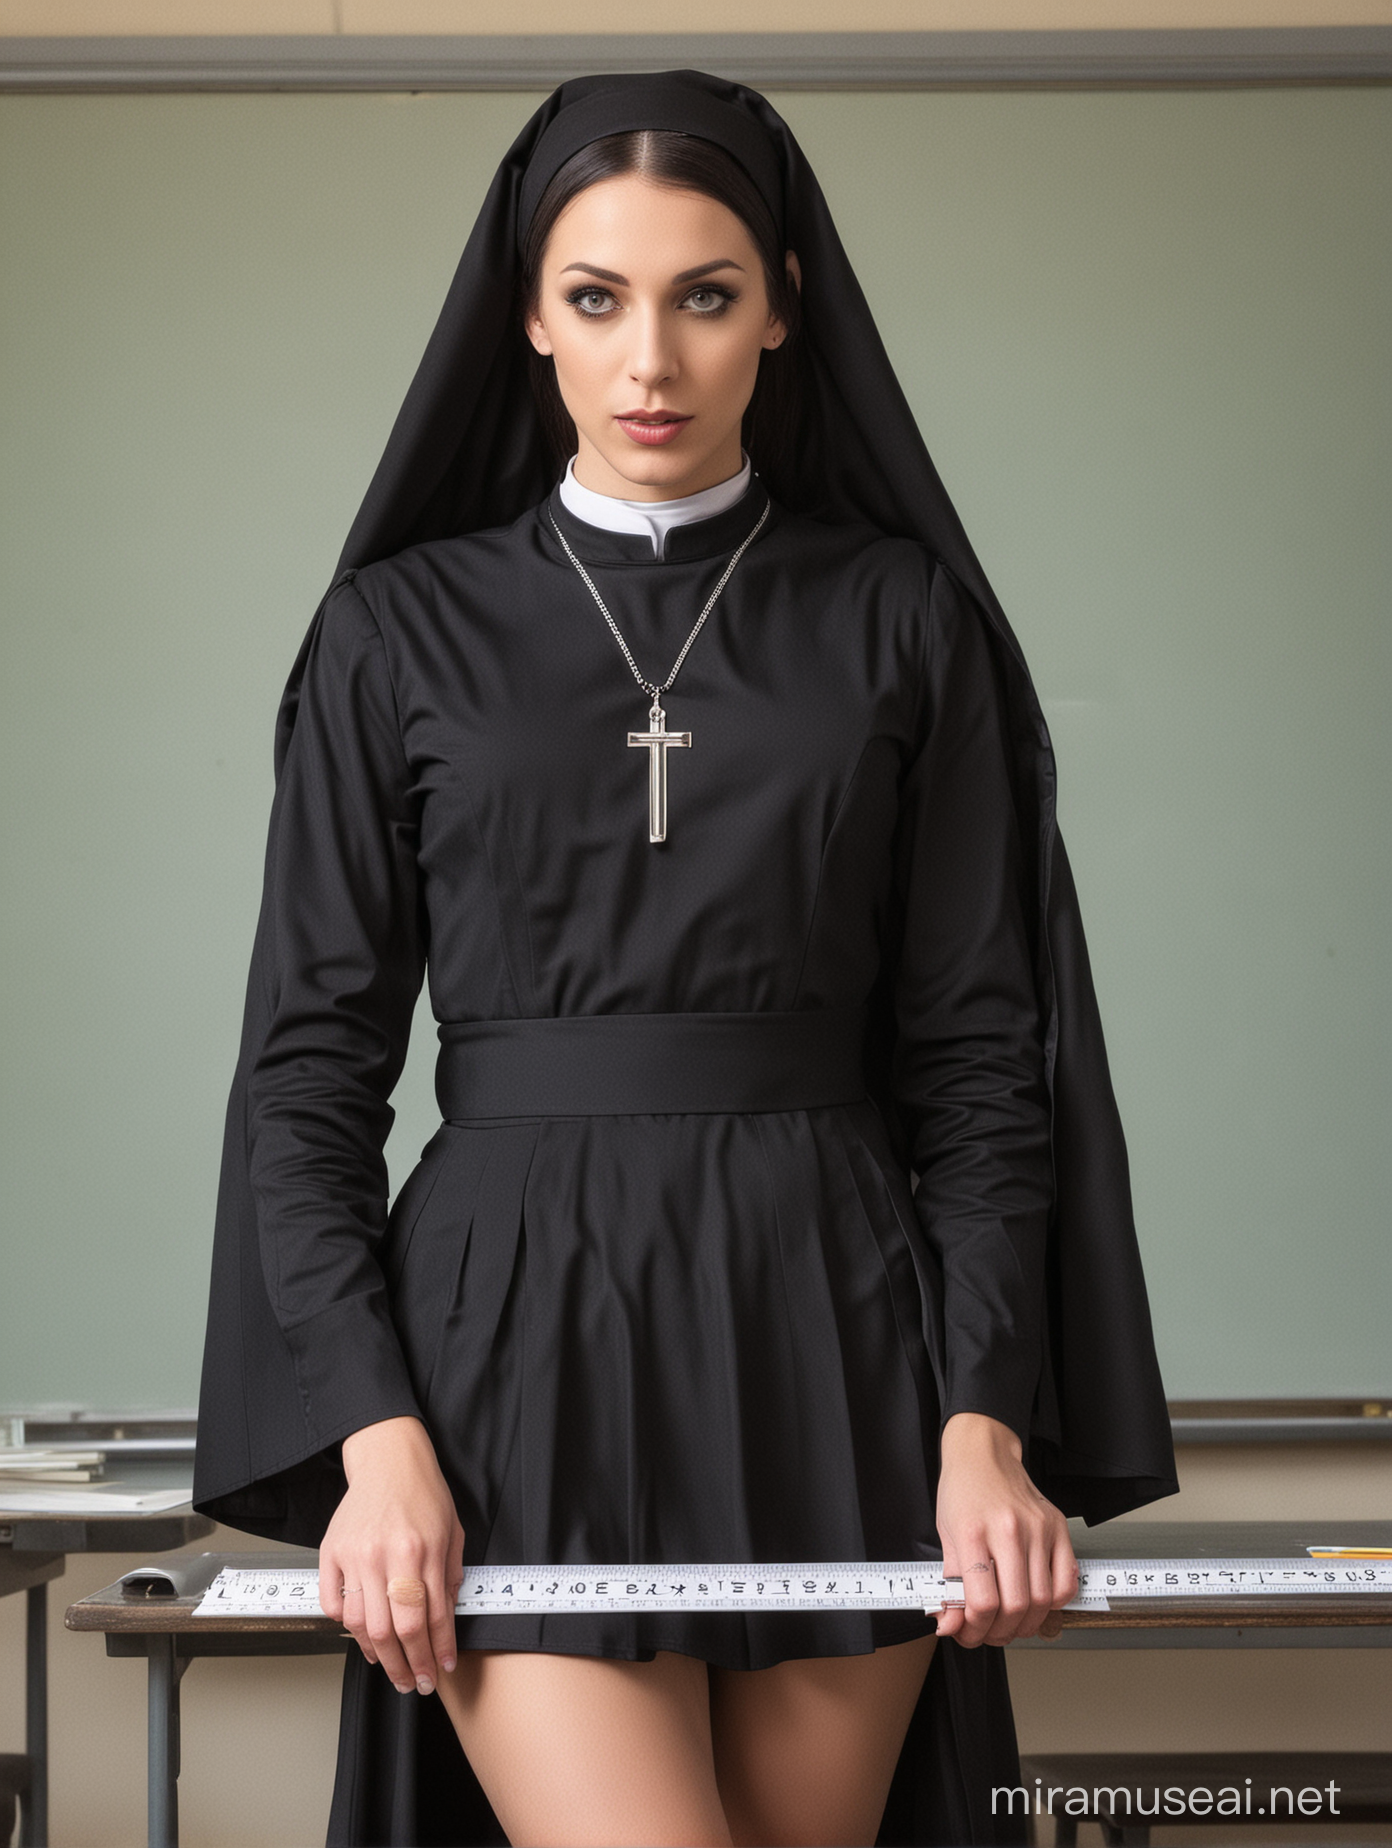 Sensual Transsexual Nun with Ruler in School Setting